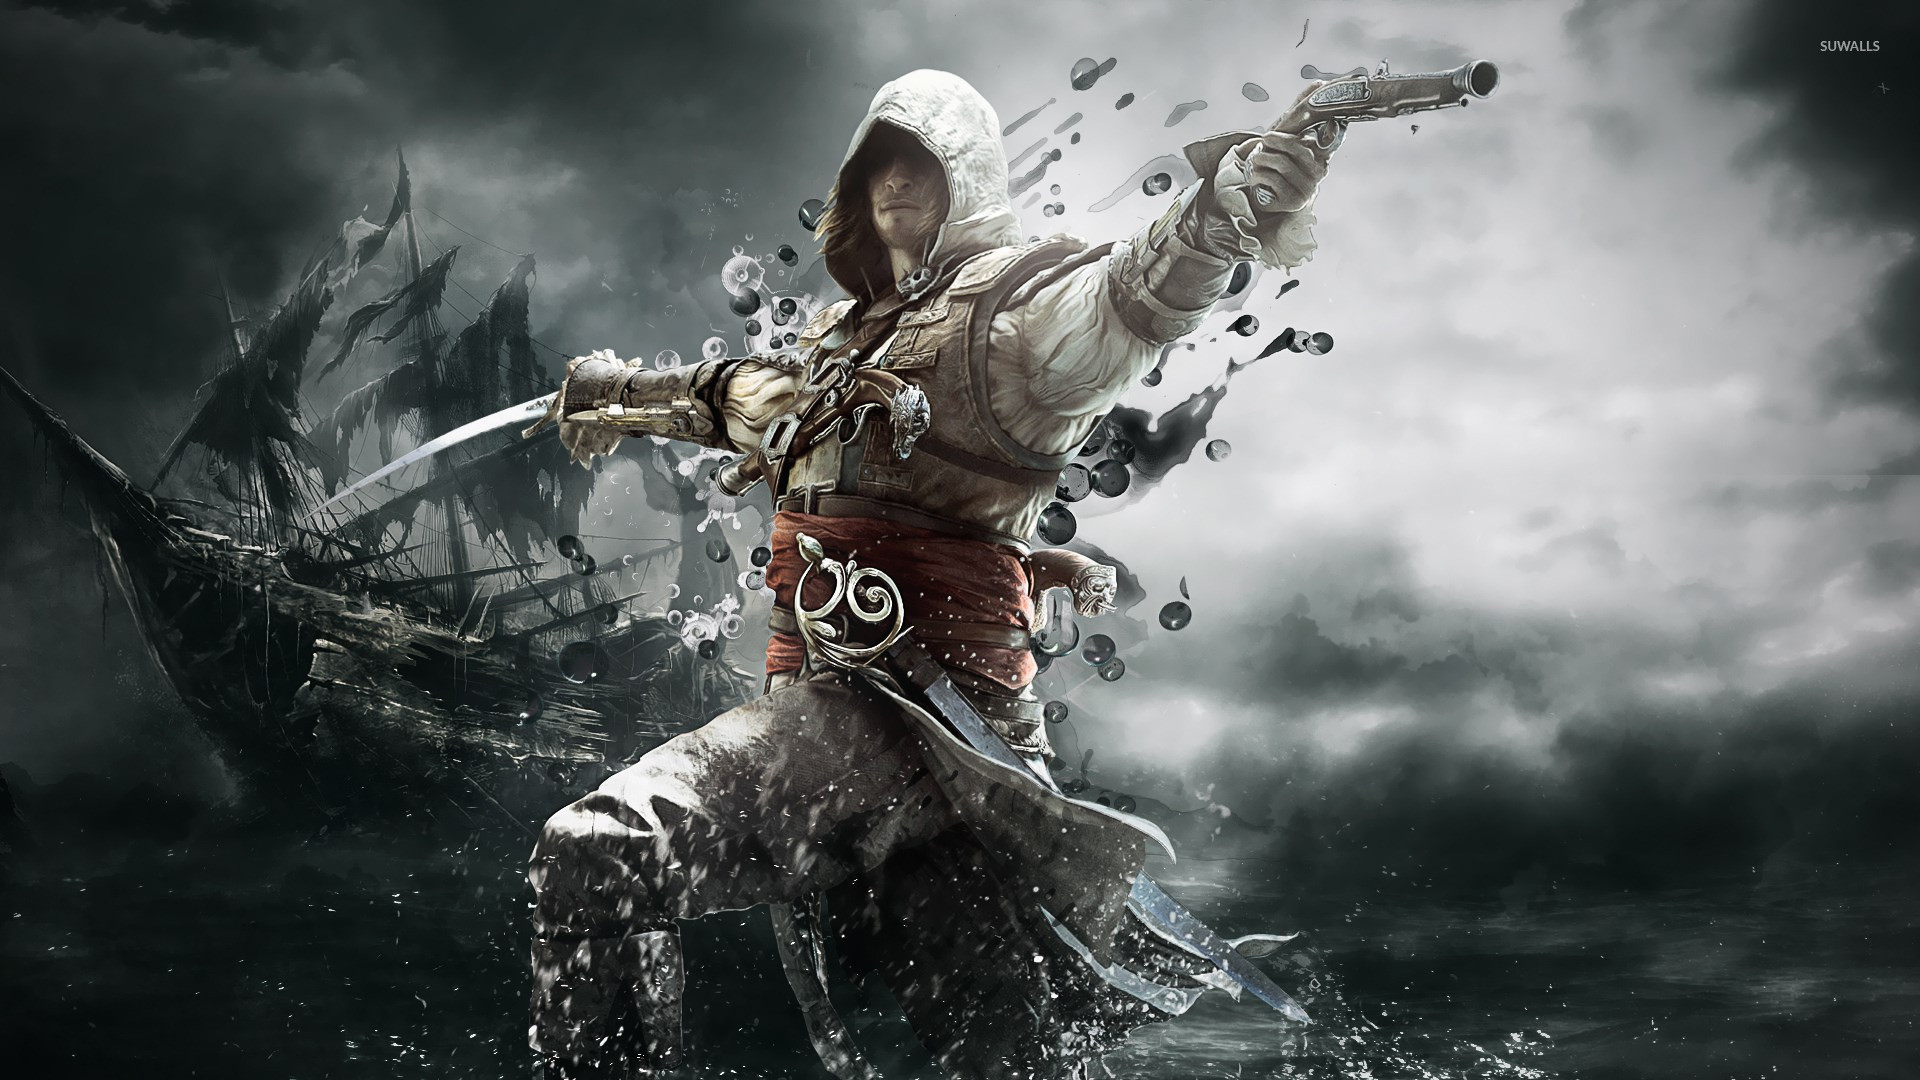 Assassins Creed Black Flag Wallpapers 80 Images